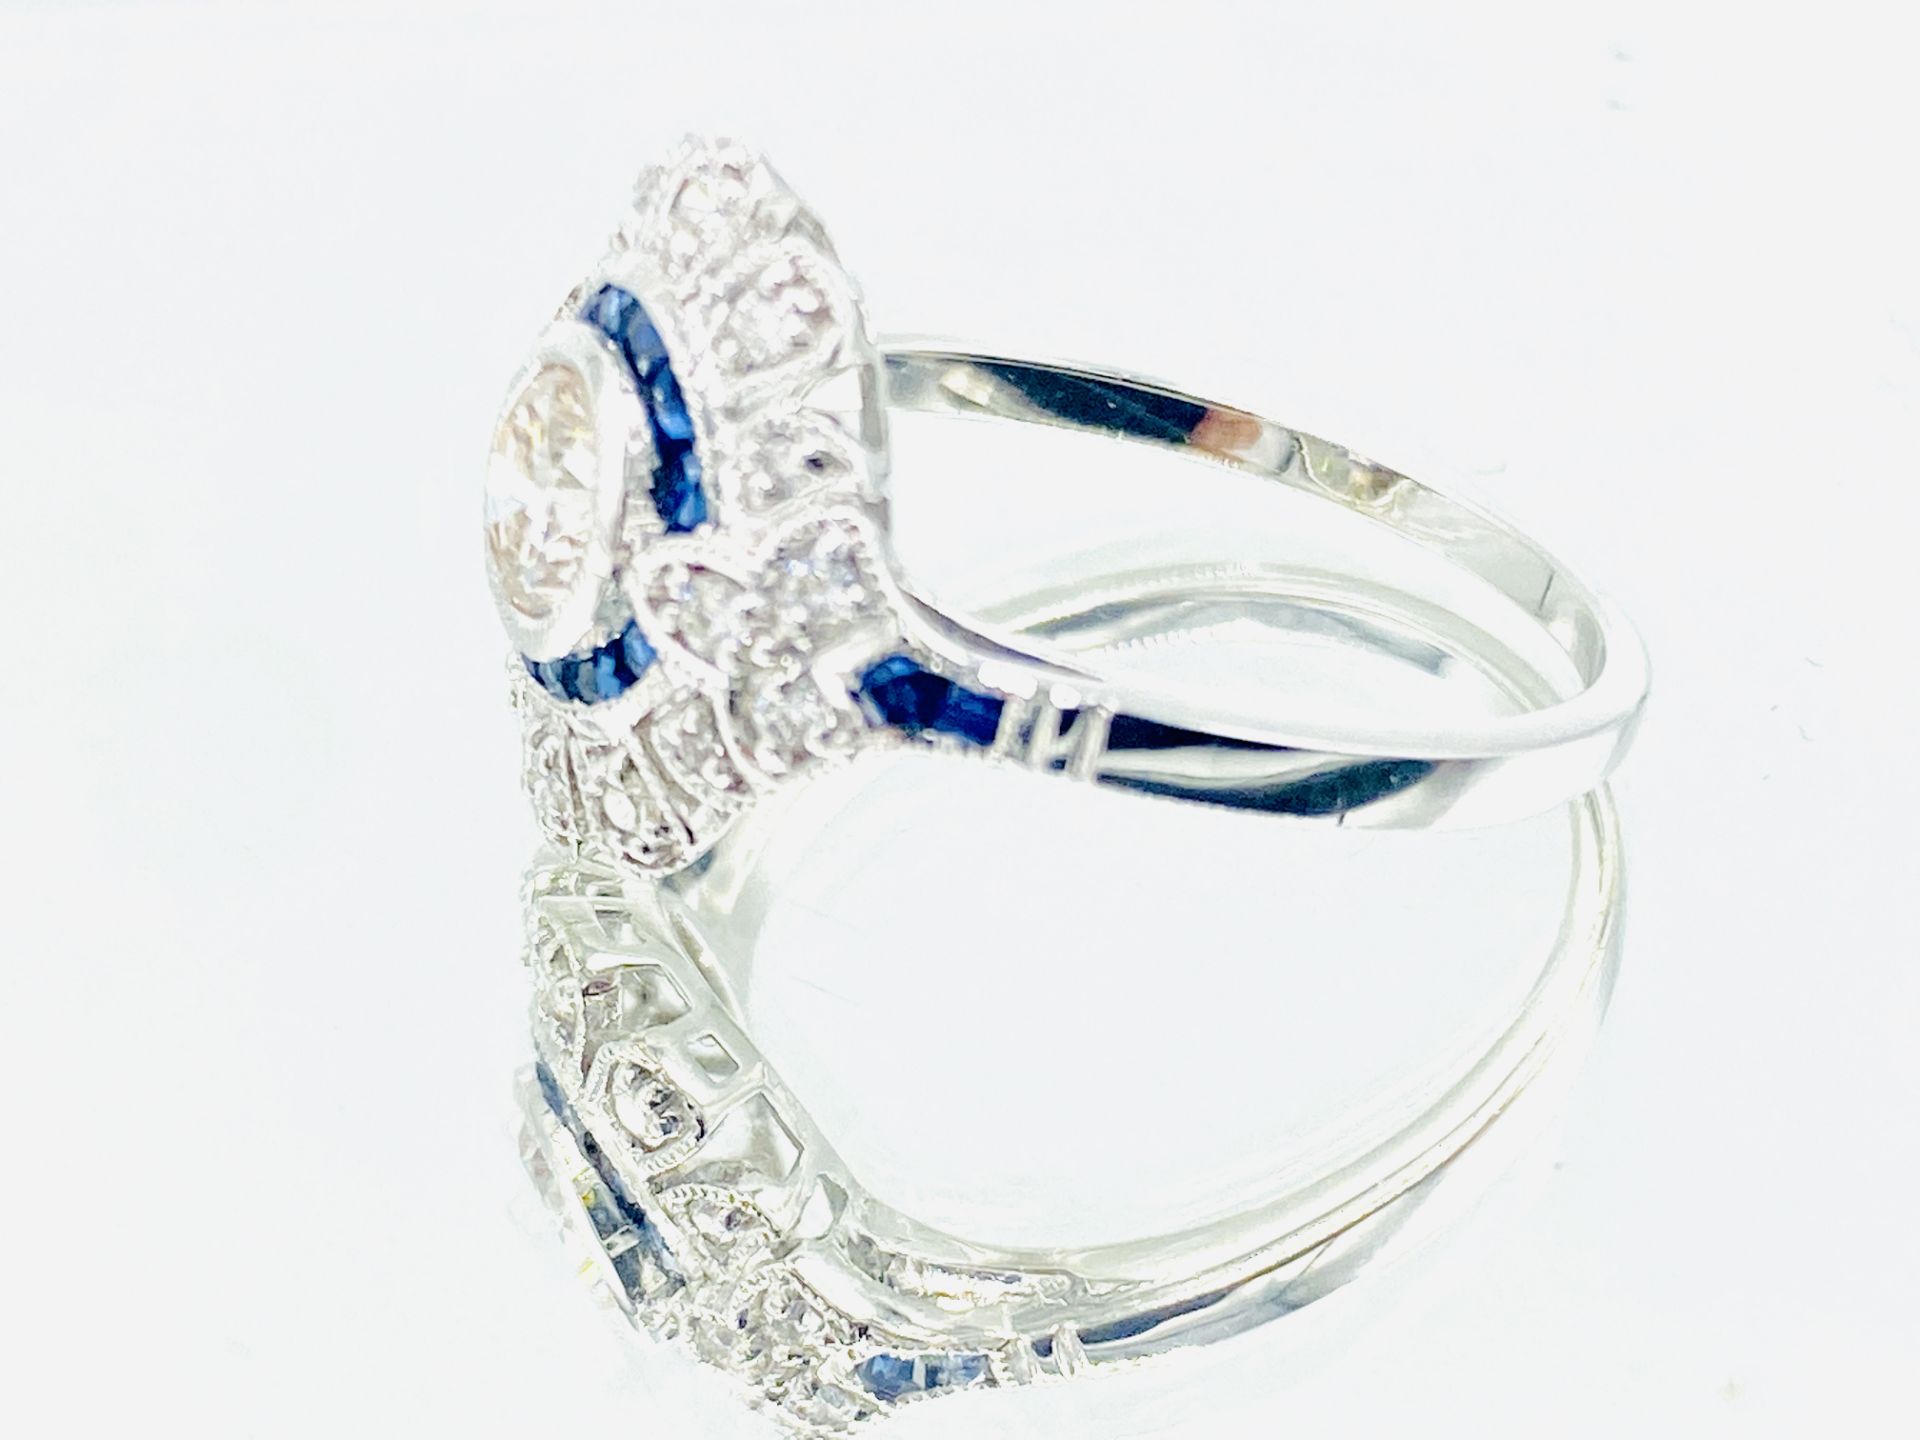 18ct white gold, diamond and sapphire ring - Image 5 of 5